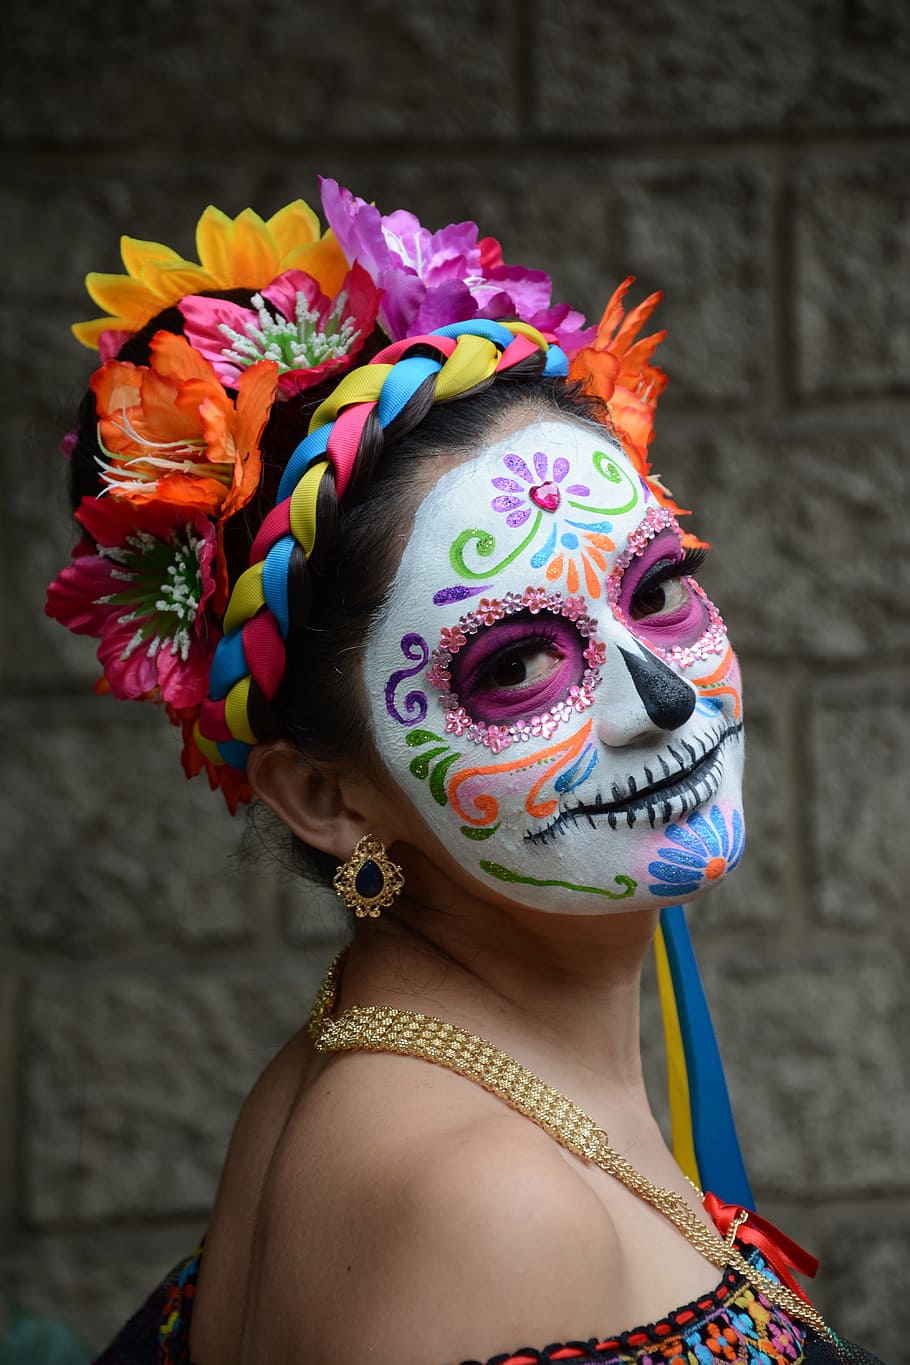 catrina, bella, face, multi colored, one person, headshot, portrait, real people, women, clothing